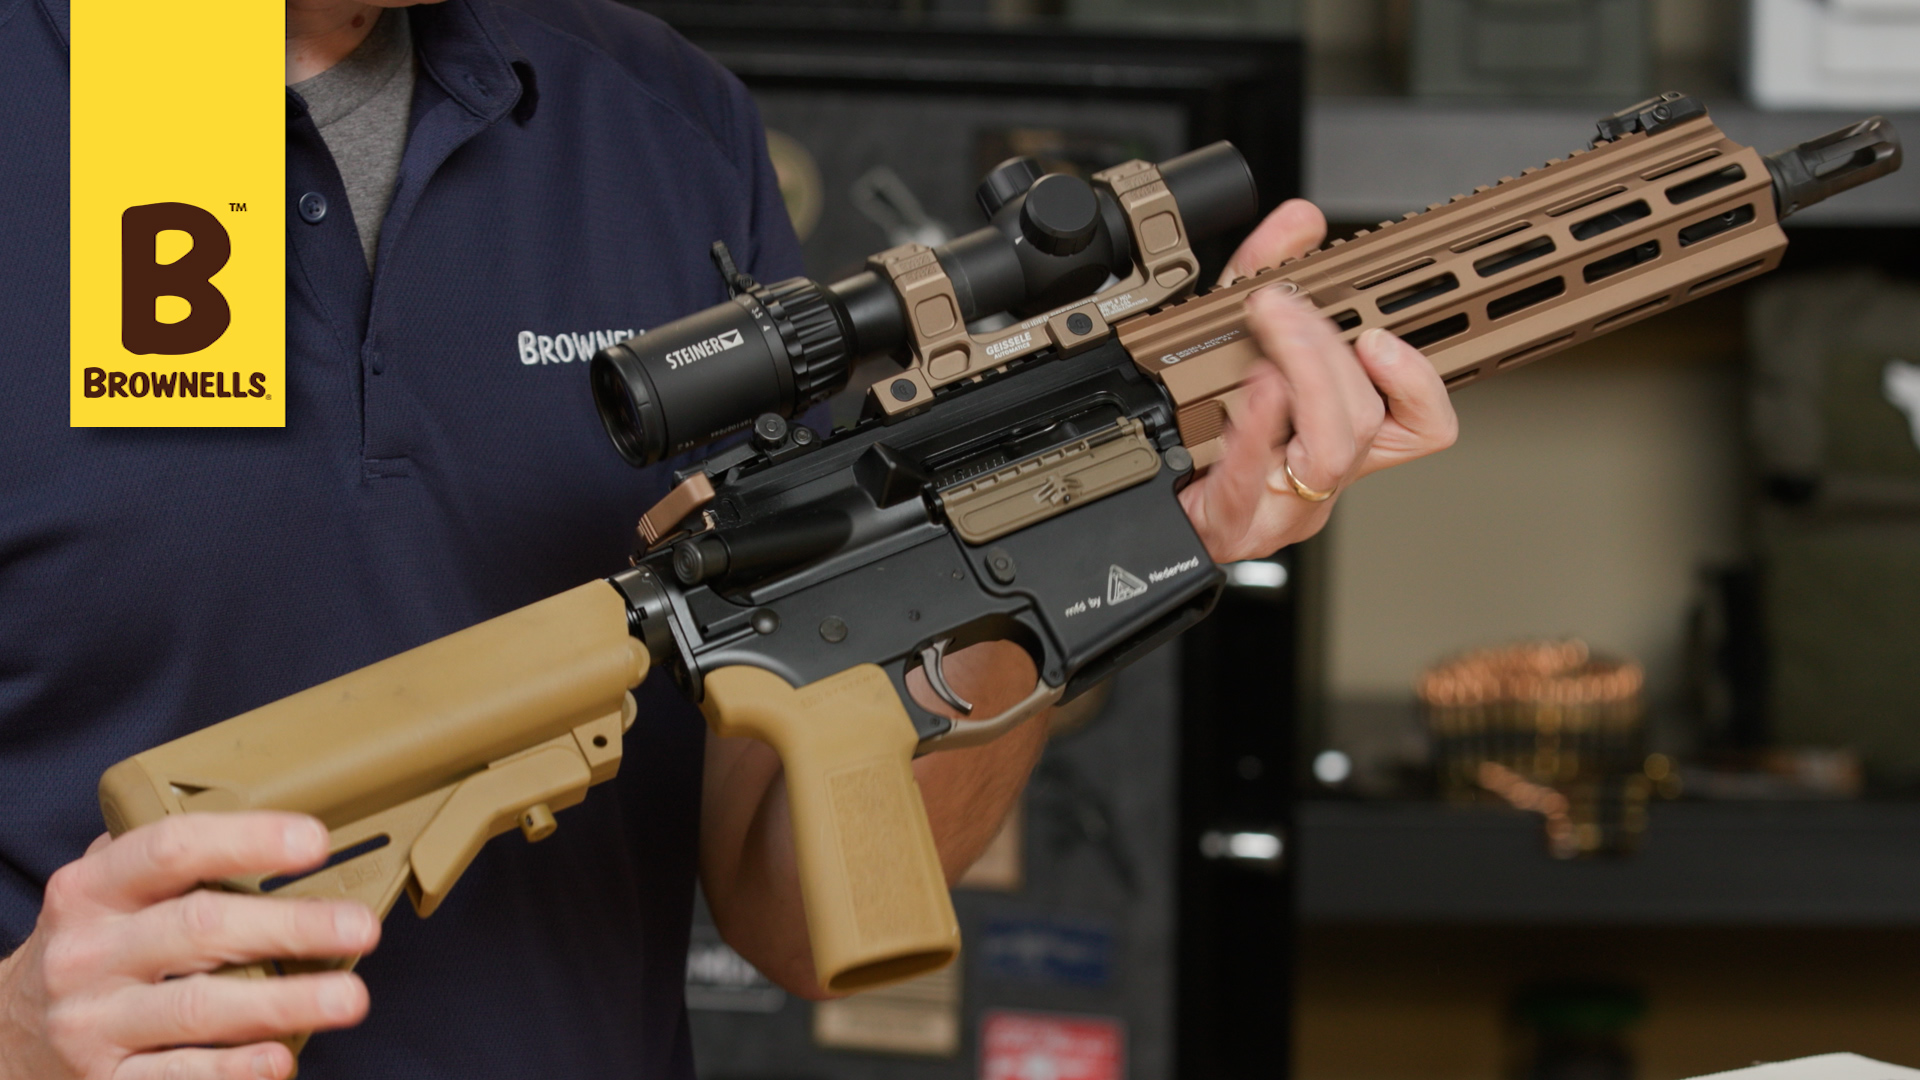 New Products: Brownells BRN-4, Geissele, Bravo Company & Lone Wolf